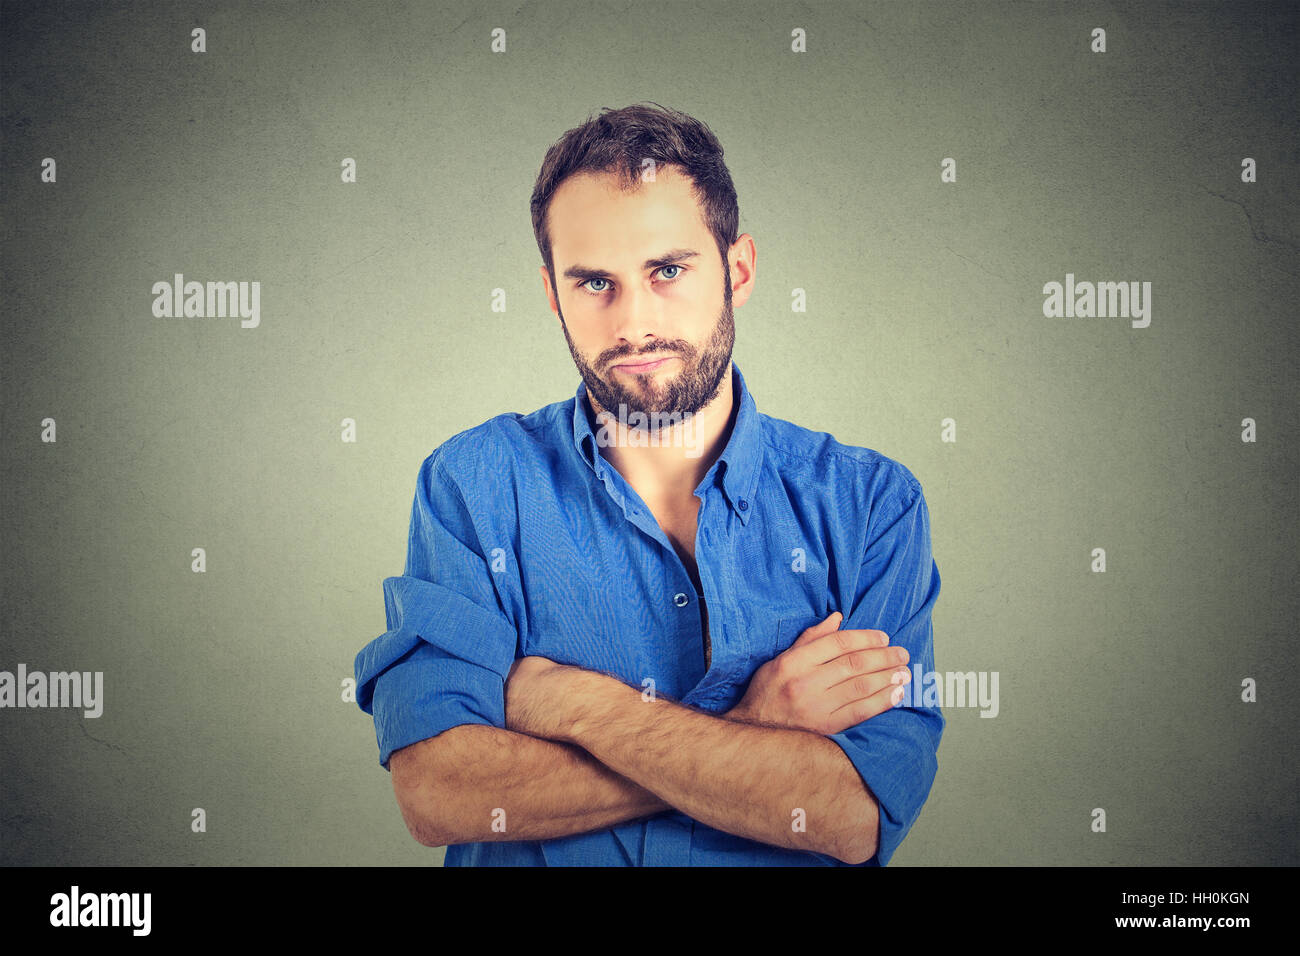 angry grumpy man looking very displeased isolated on gray wall background. Negative human emotions facial expression feelings Stock Photo